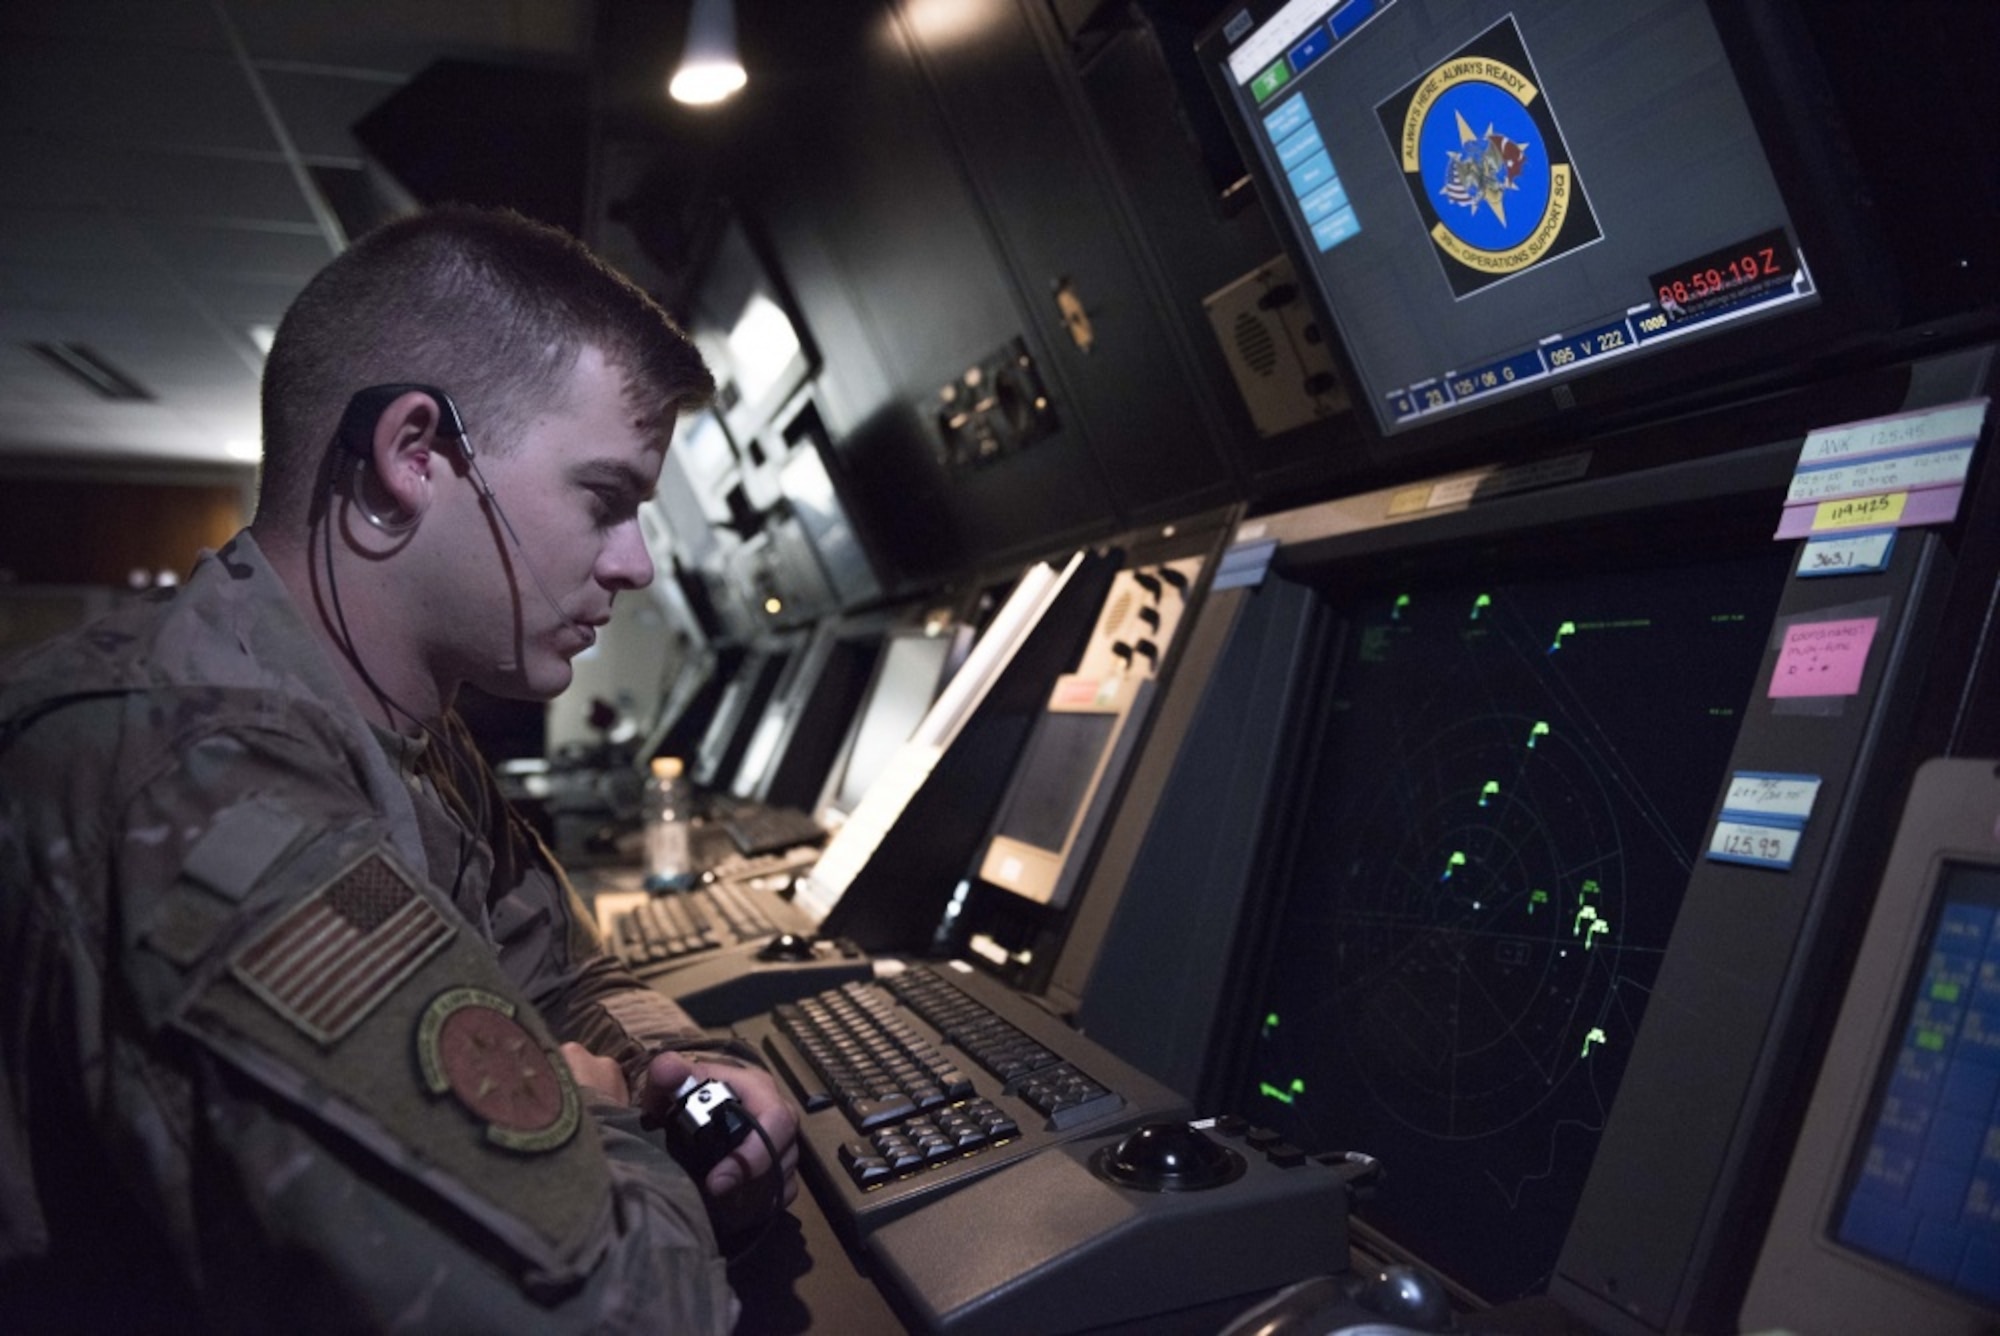 U.S. Air Force Staff Sgt. Charles Stackhouse, 39th Operations Support Squadron air traffic controller, monitors a radar Aug. 9, 2019, at Incirlik Air Base, Turkey. Air traffic controllers play a crucial role in preventing aircraft-related incidents. (U.S. Air Force photo by Staff Sgt. Joshua Magbanua)